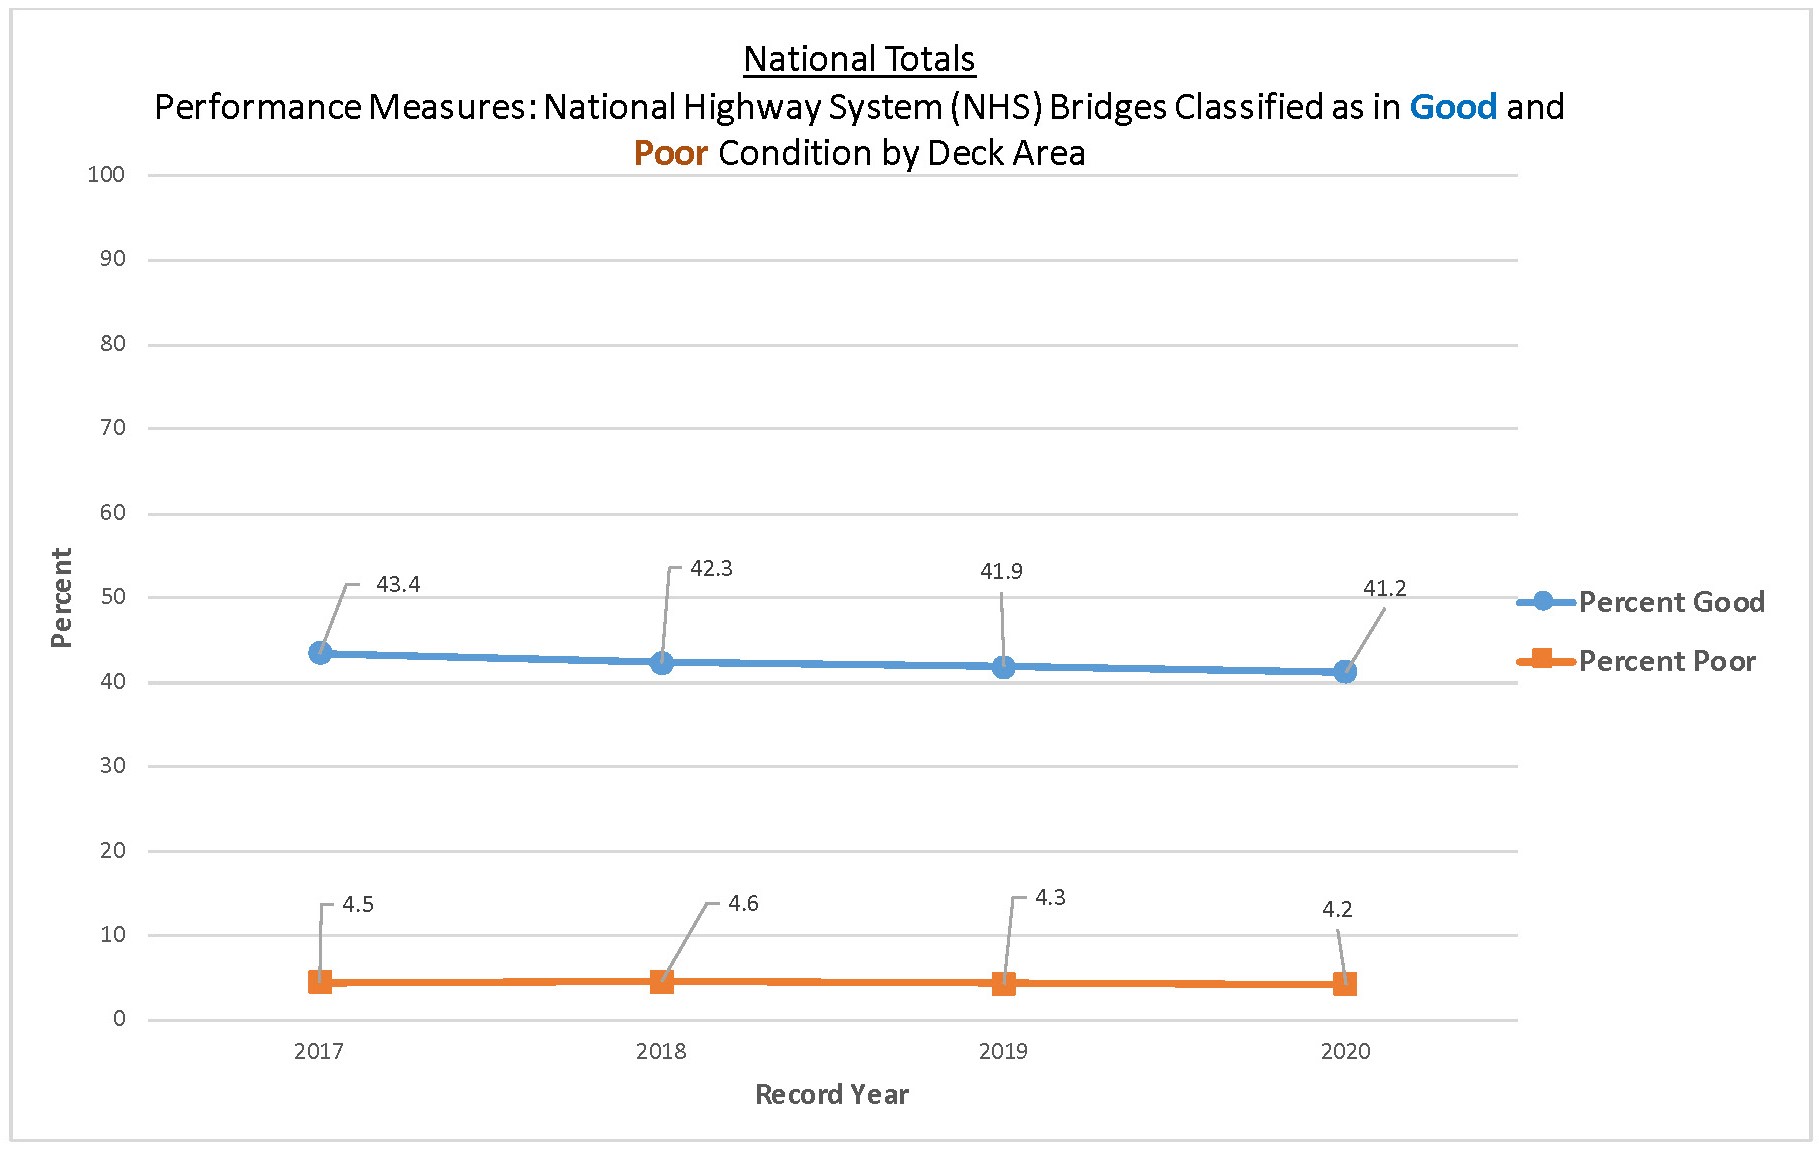 National Totals Line Graph for Performance Measures: NHS Bridges Classified as in Good and Poor Condition bt Deck Area